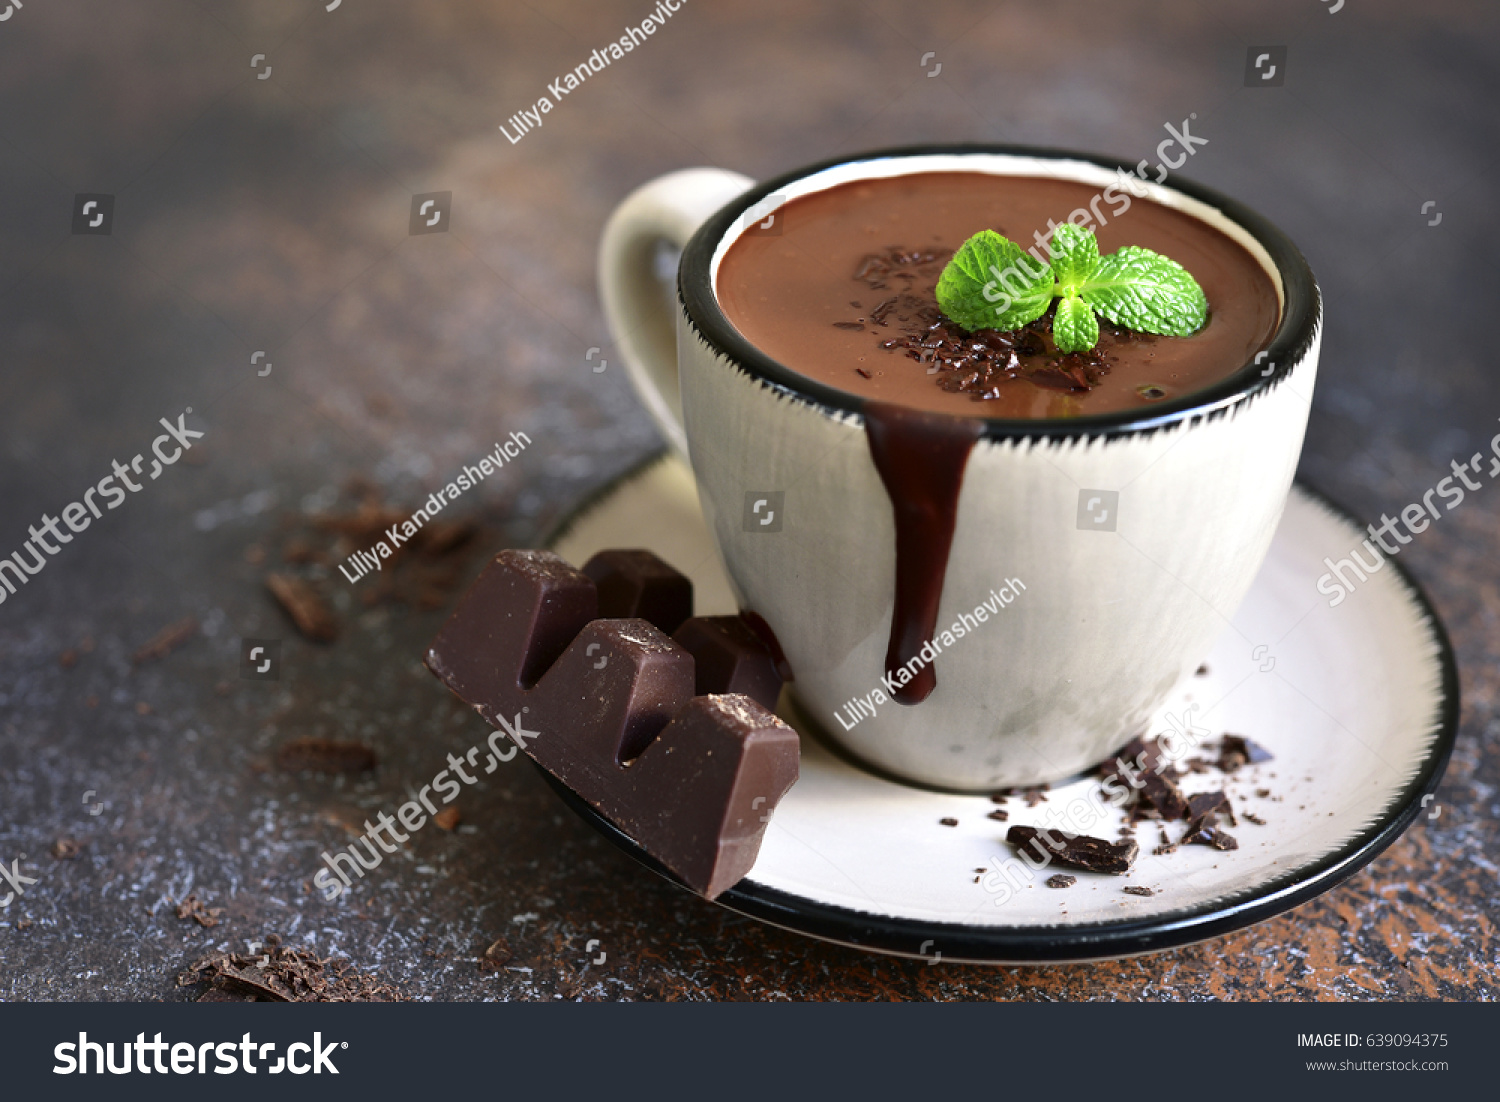 Portion of homemade mint hot chocolate in a cup on a dark slate,stone or metal background. #639094375